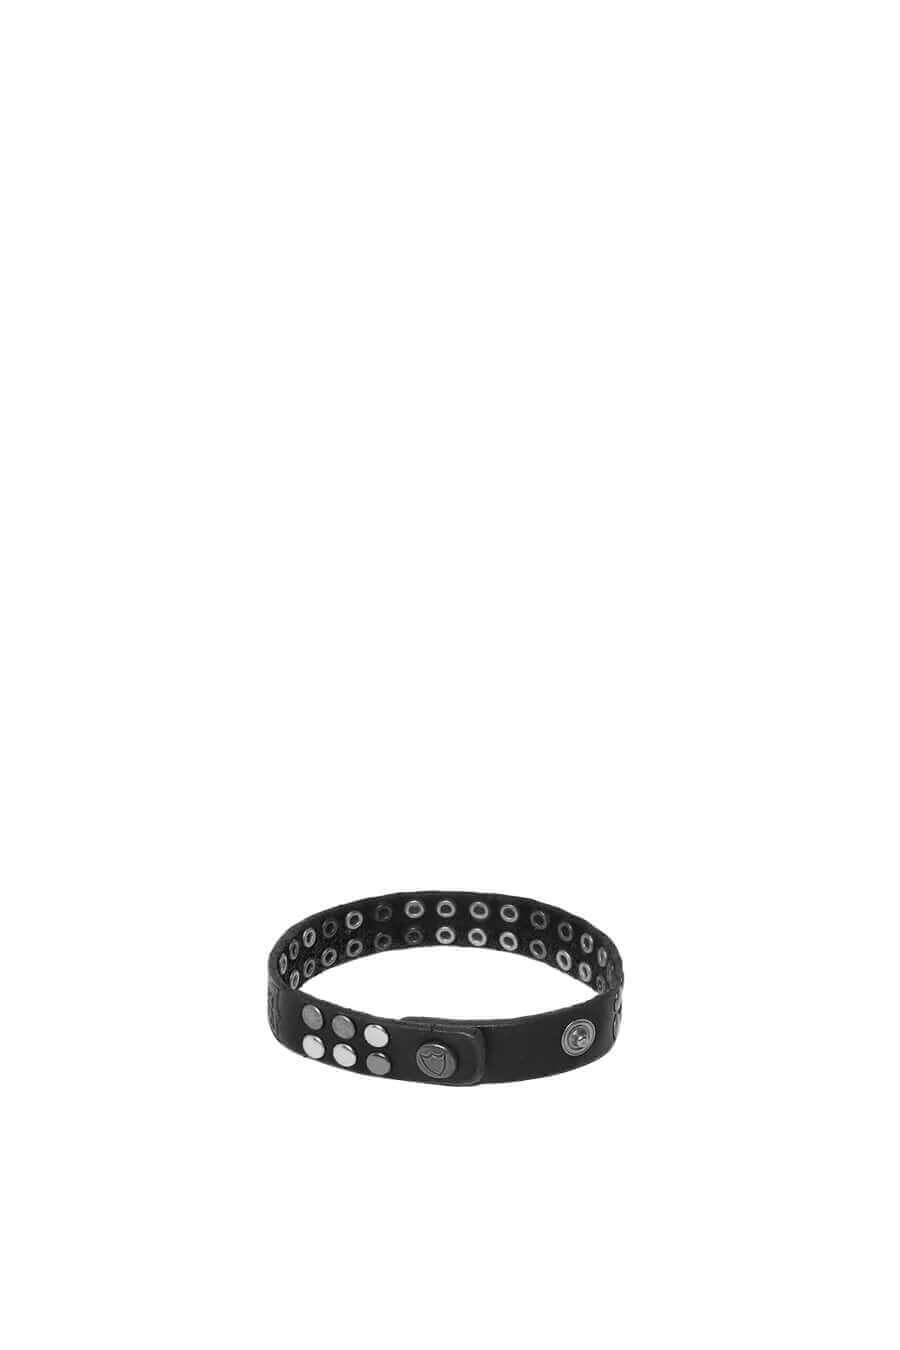 10.000 MINI BR Black leather bracelet with double line studs, zamac button closure with carved HTC Los Angeles logo. 100% Made in Italy. HTC LOS ANGELES